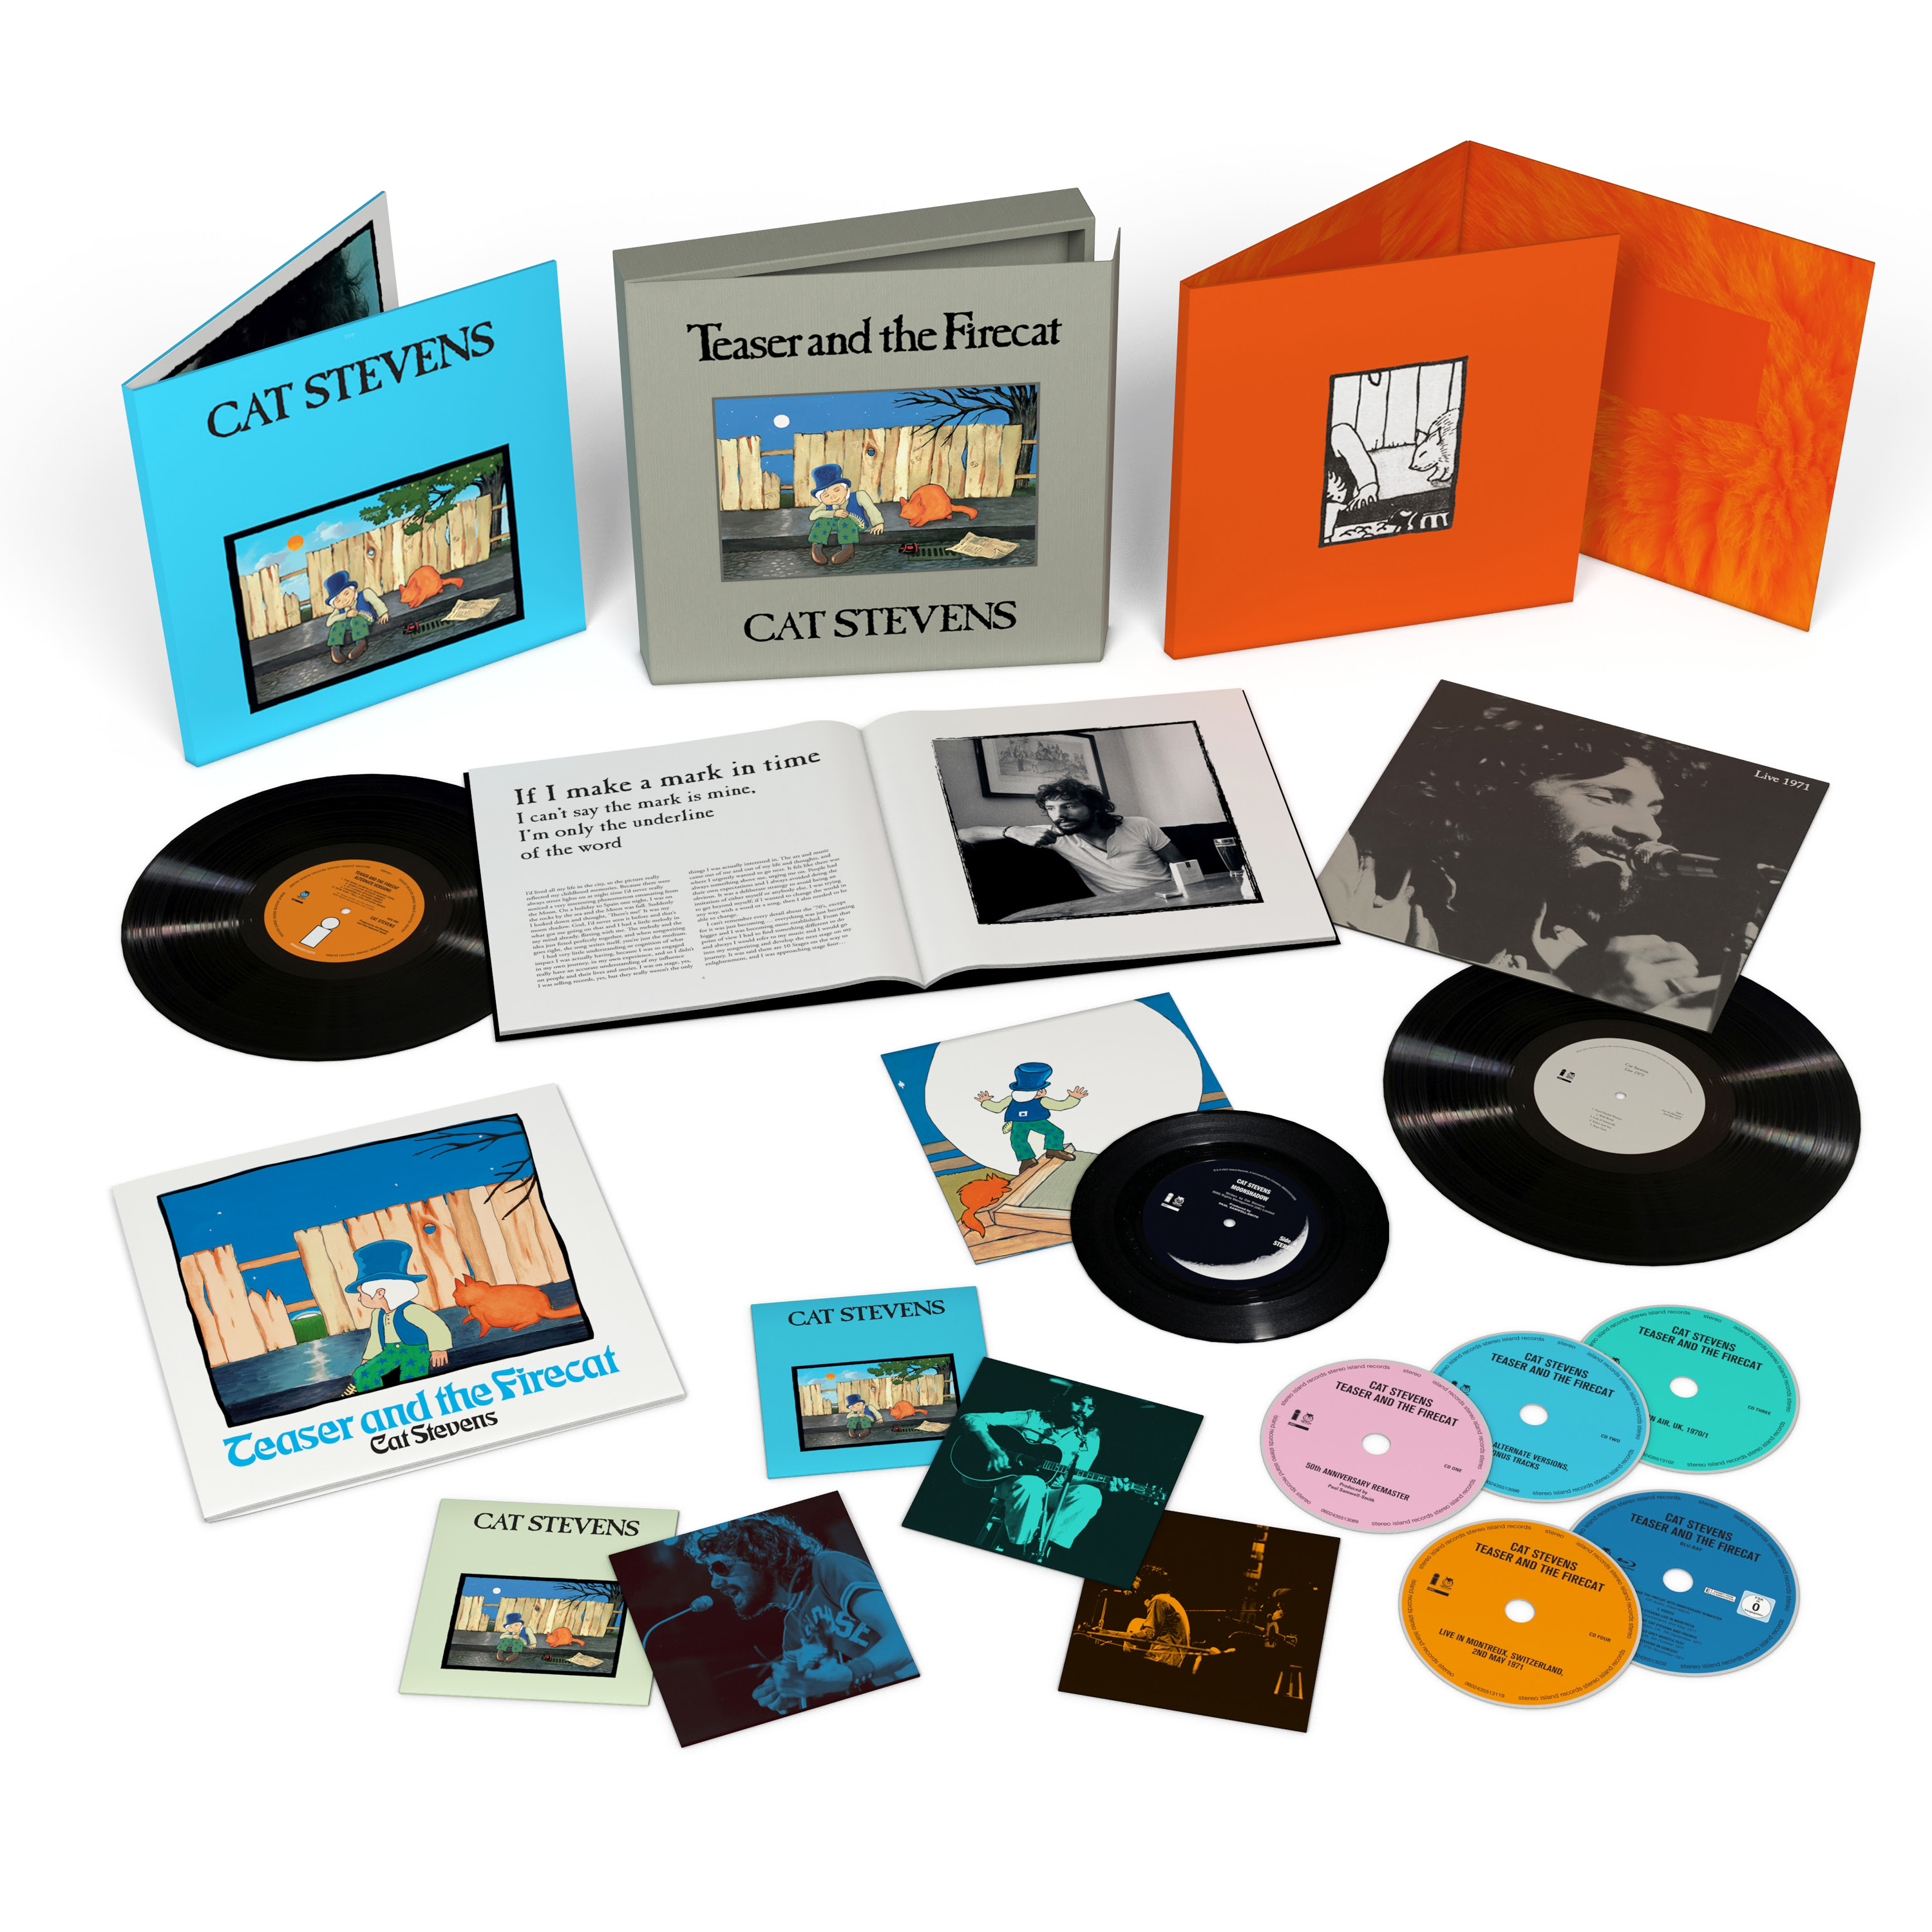 Yusuf Cat Stevens Announces Teaser And The Firecat 50th Anniversary Editions Grateful Web